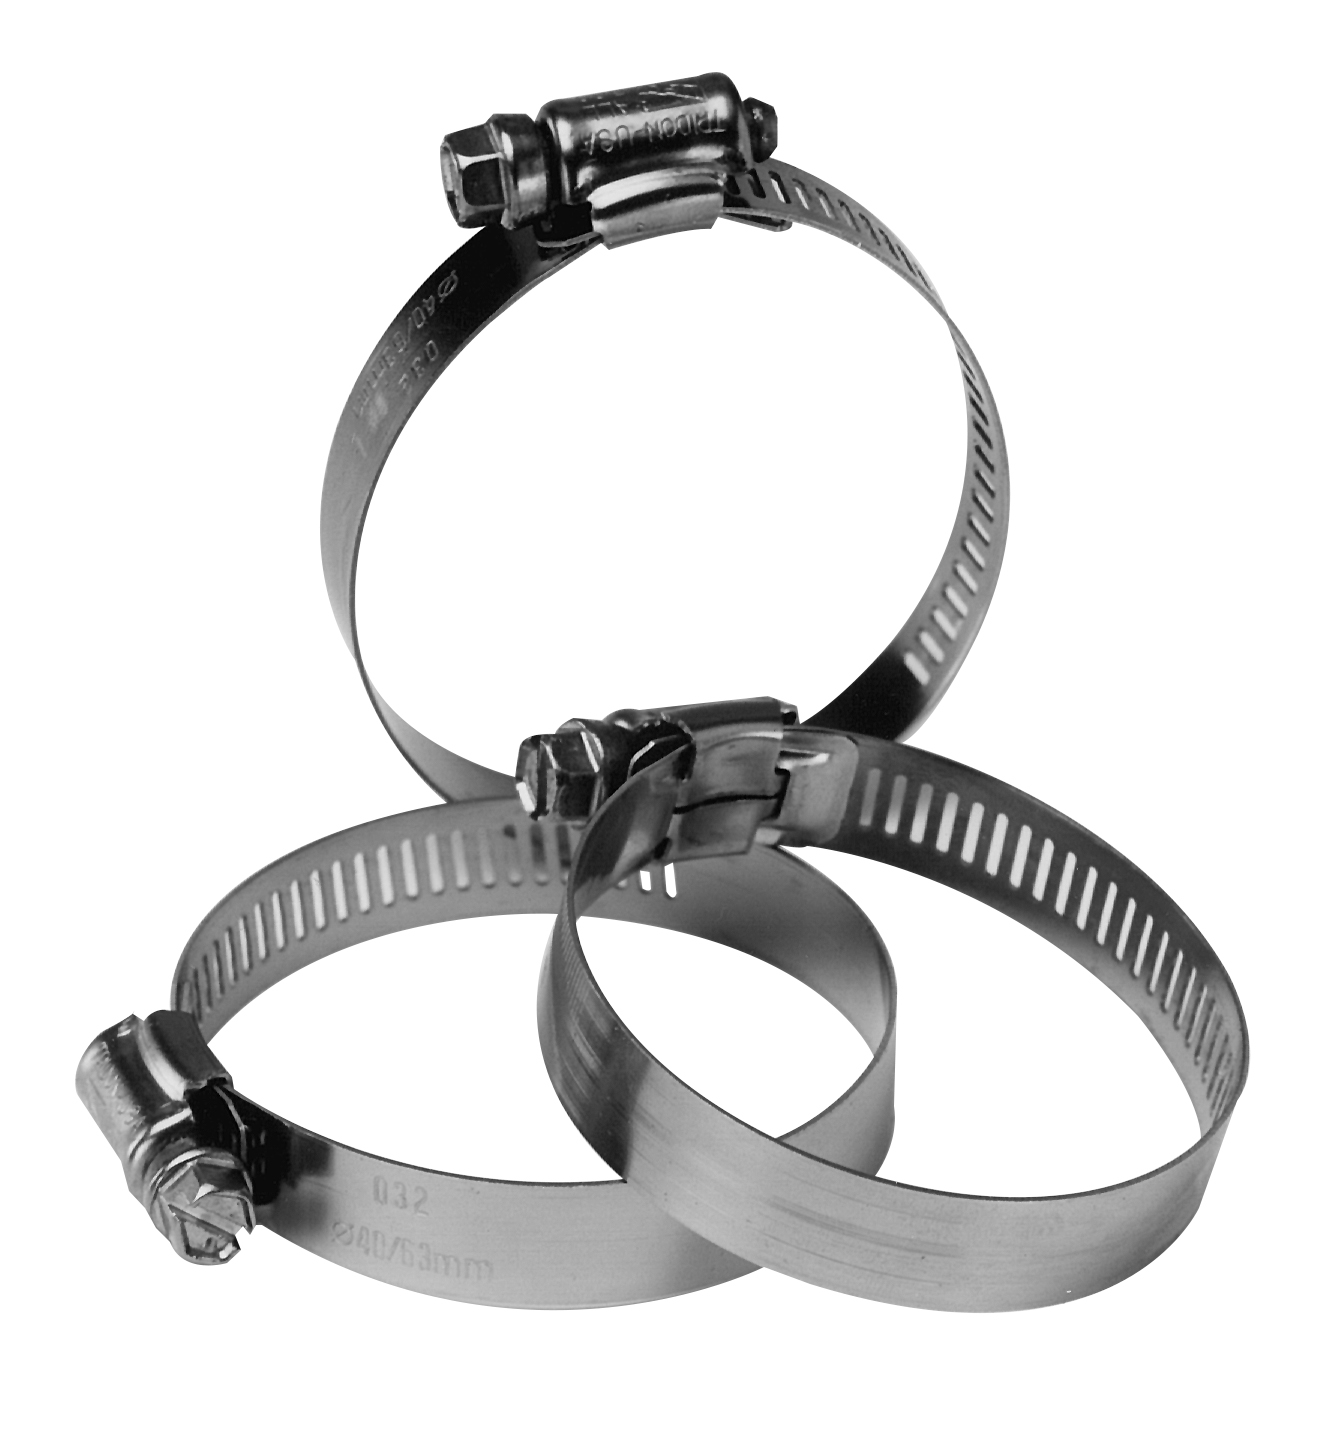 79319 7/8-2 3/4 SIZE 36 HOSE CLAMP - Clamps and Hangers